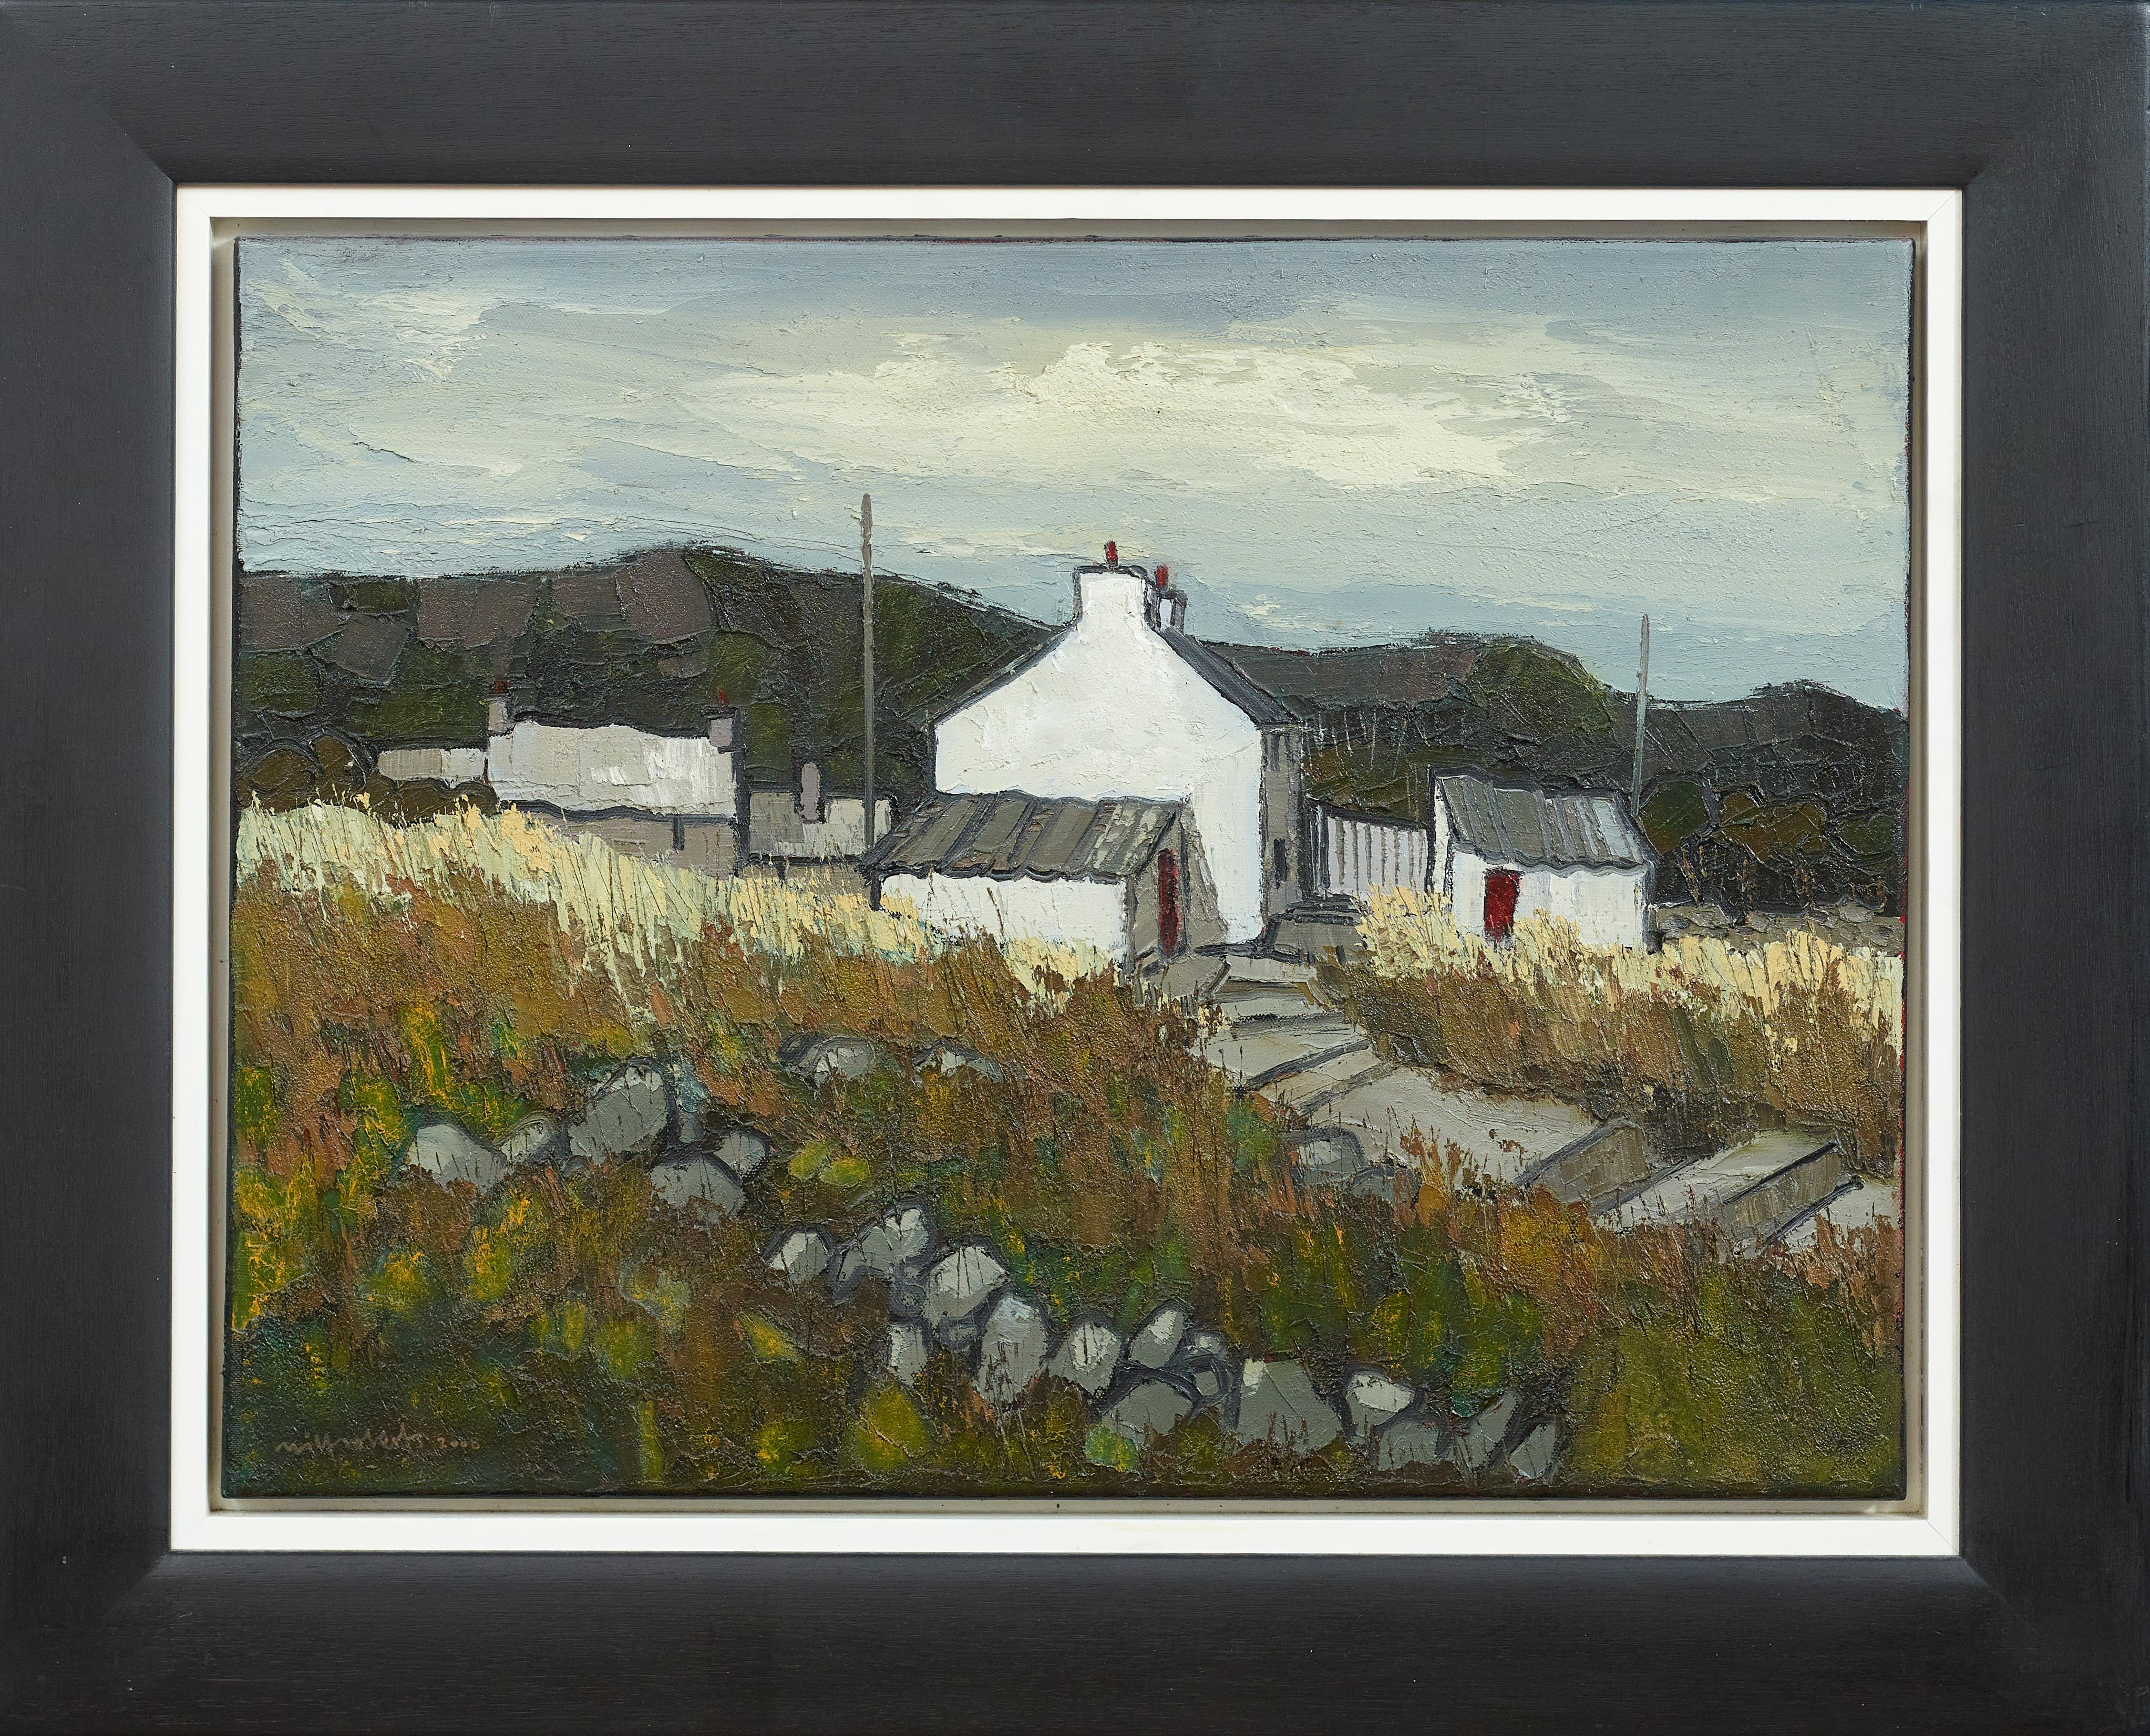 With a rich impasto and organic colour palette you can see Wilf Roberts takes great inspiration from Sir Kyffin Williams – a fellow Welsh landscape painter.
Wilf Roberts was born in 1941 on the Isle of Anglesey. In his early years he was raised in